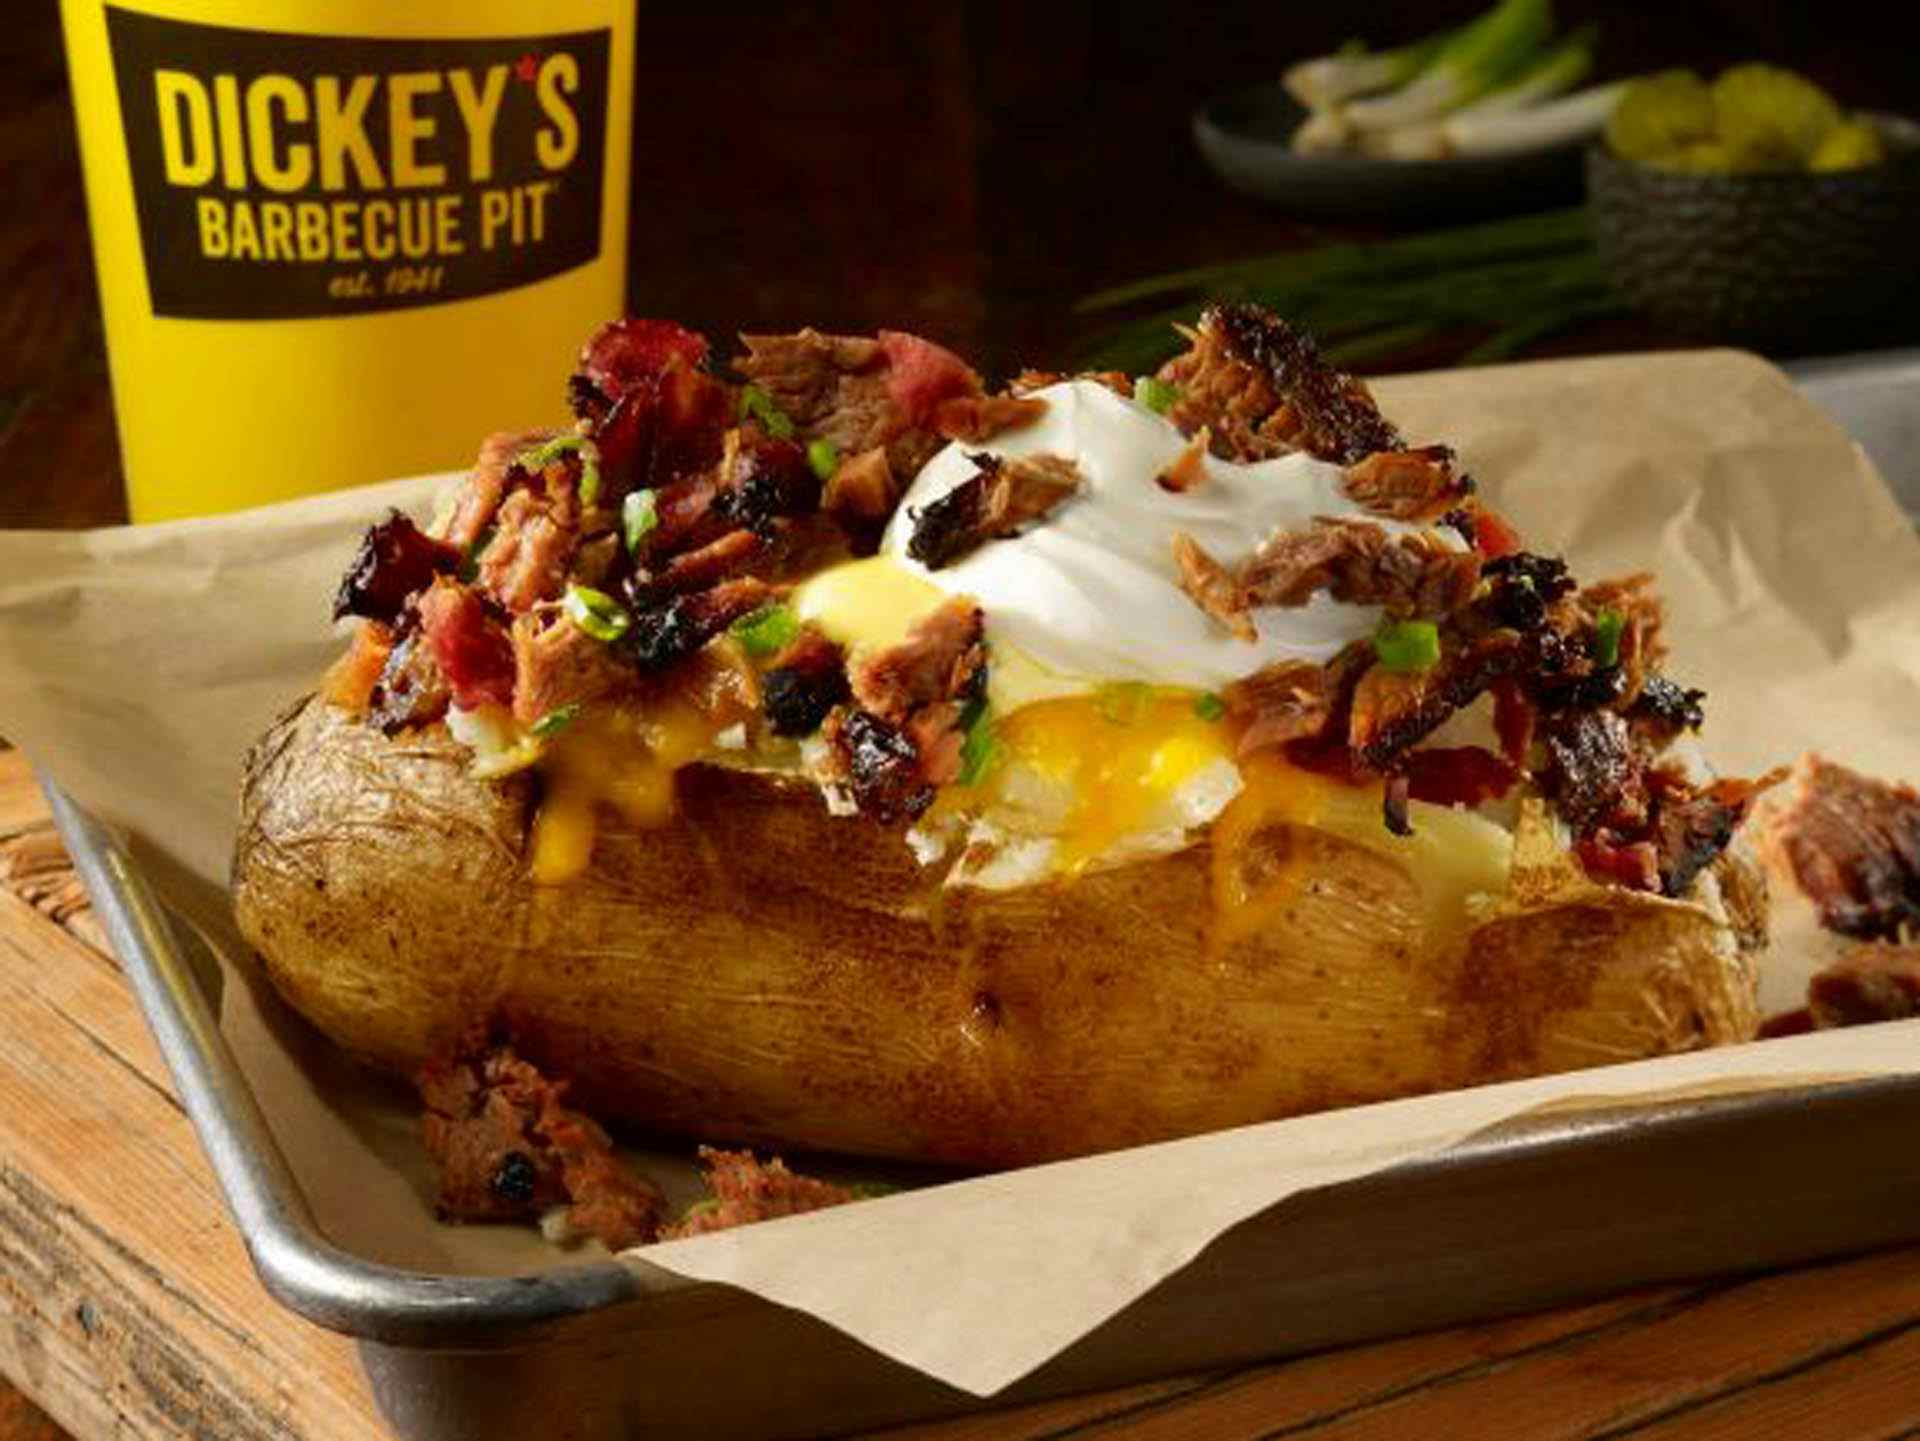 Entrepreneurial Duo Bring Dickey’s Barbecue Pit to Garland